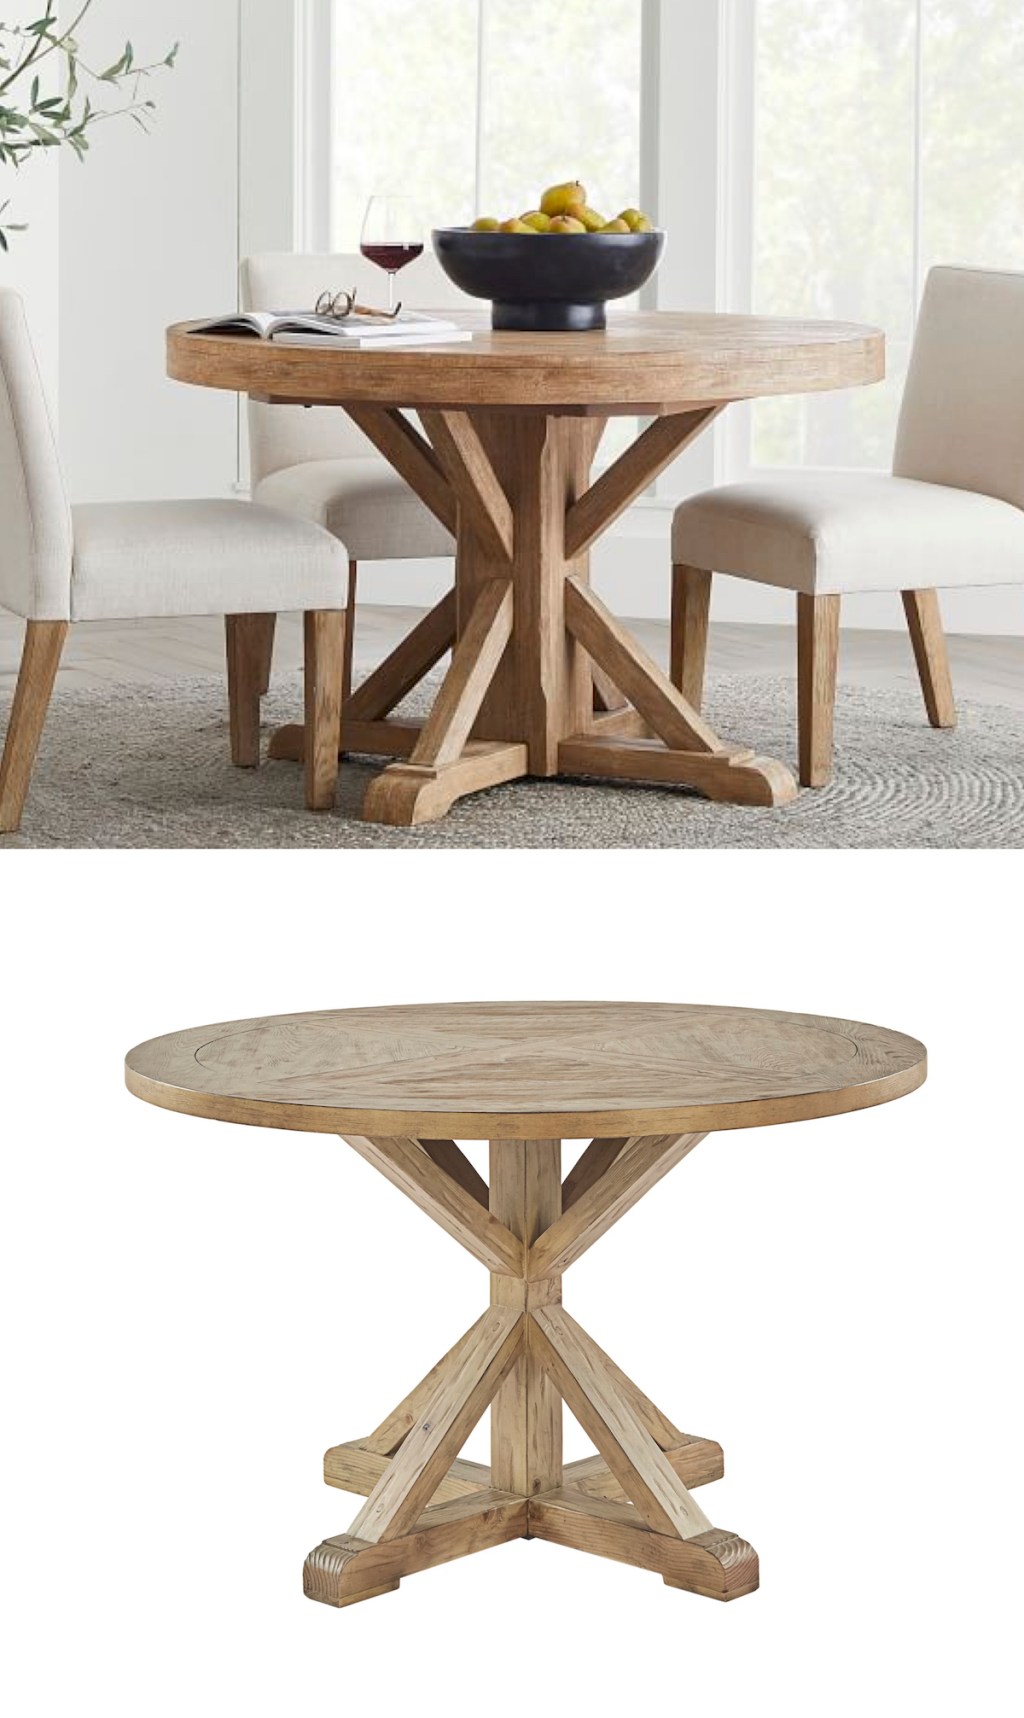 comparison of two wood dining room tables 